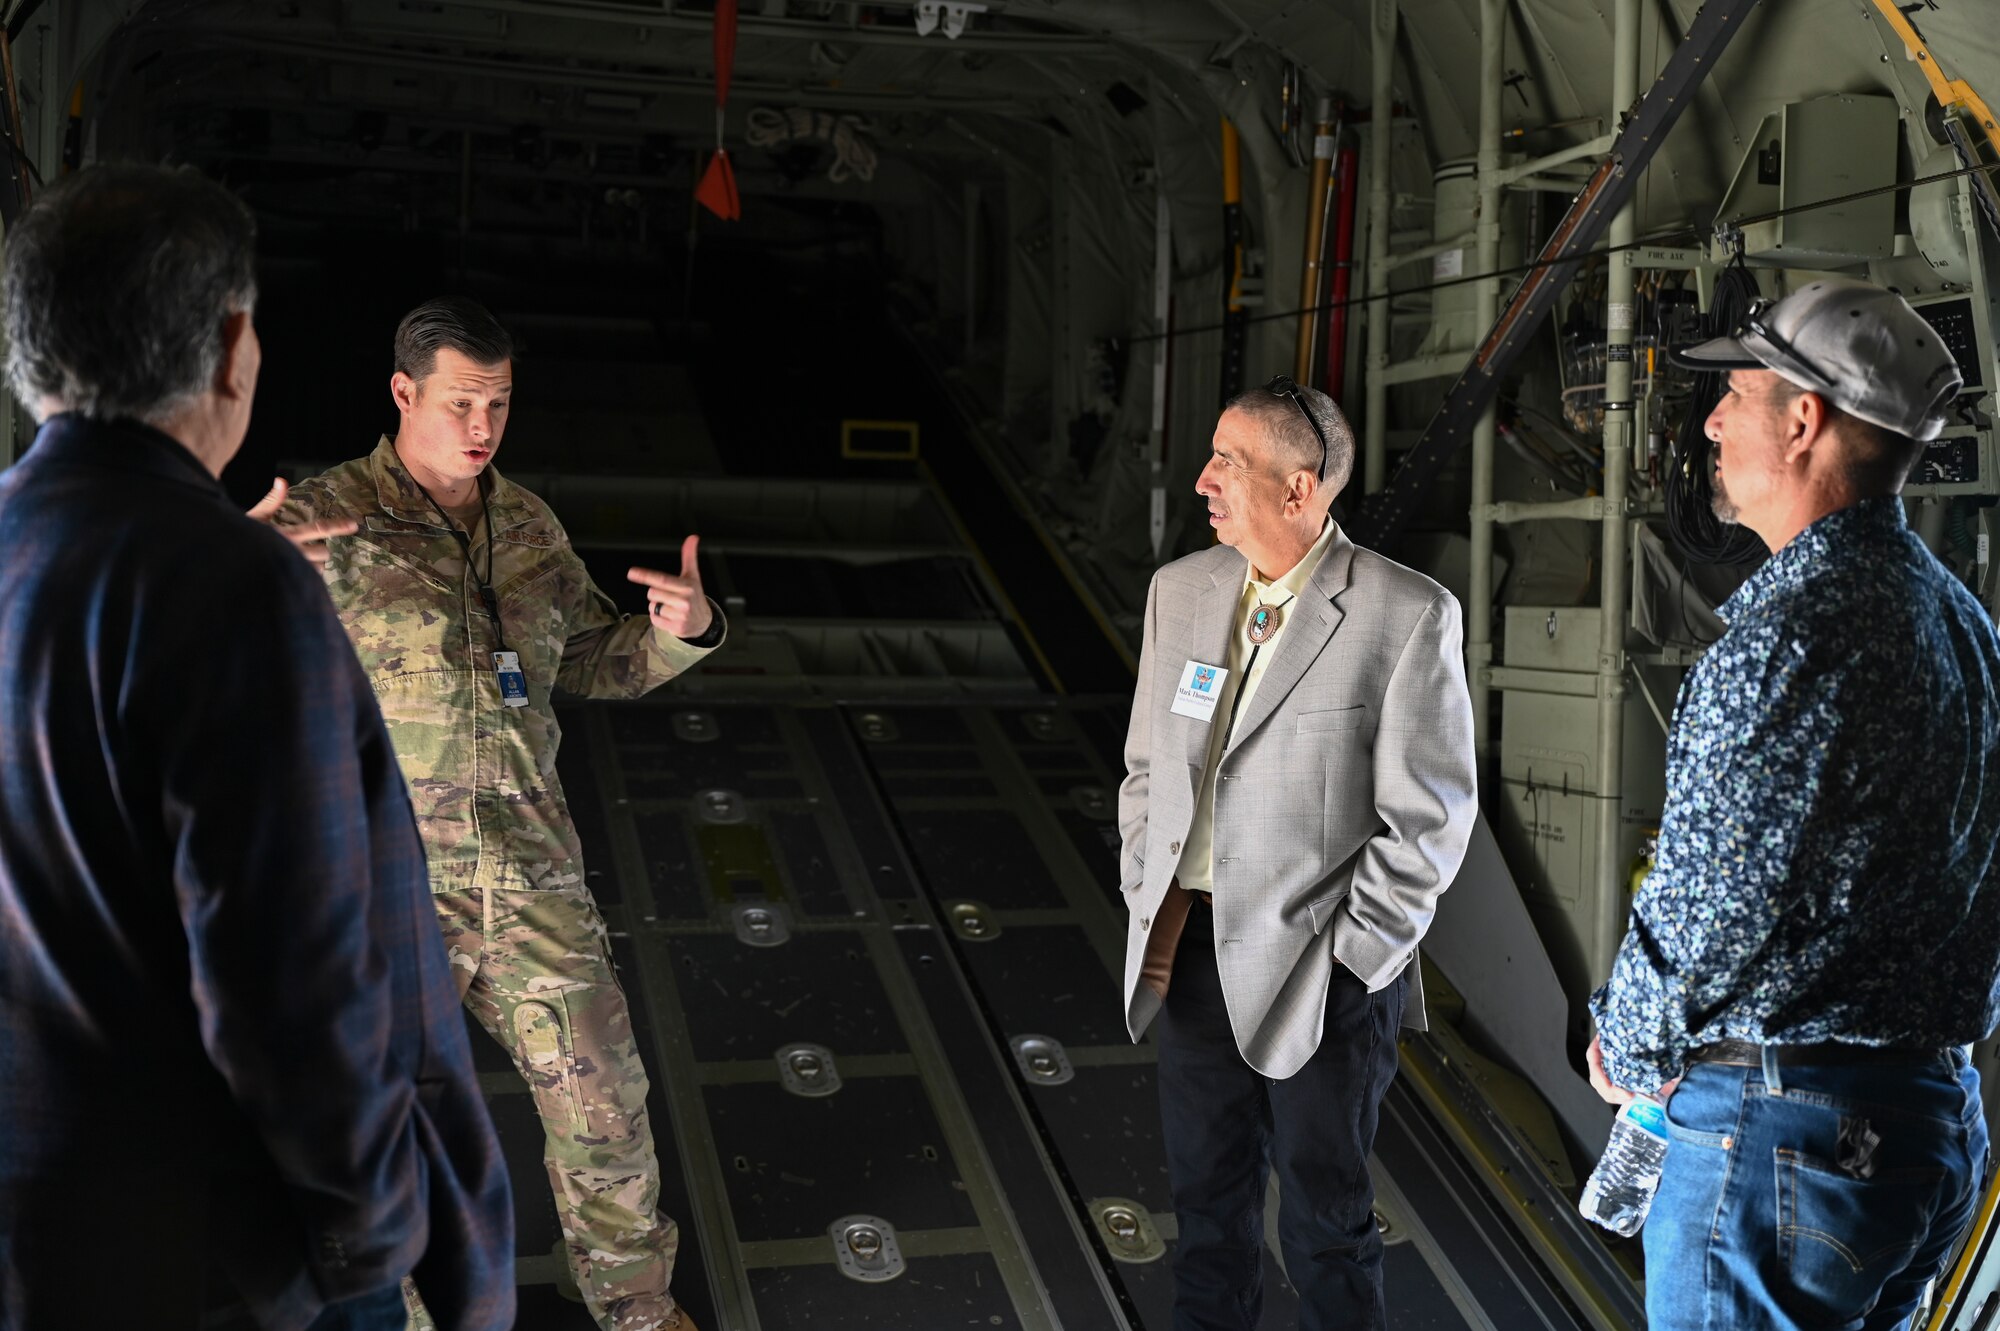 Various New Mexico Pueblo tribal members visited the 58th Special Operations Wing at Kirtland Air Force Base, New Mexico, on Nov. 15, 2021.